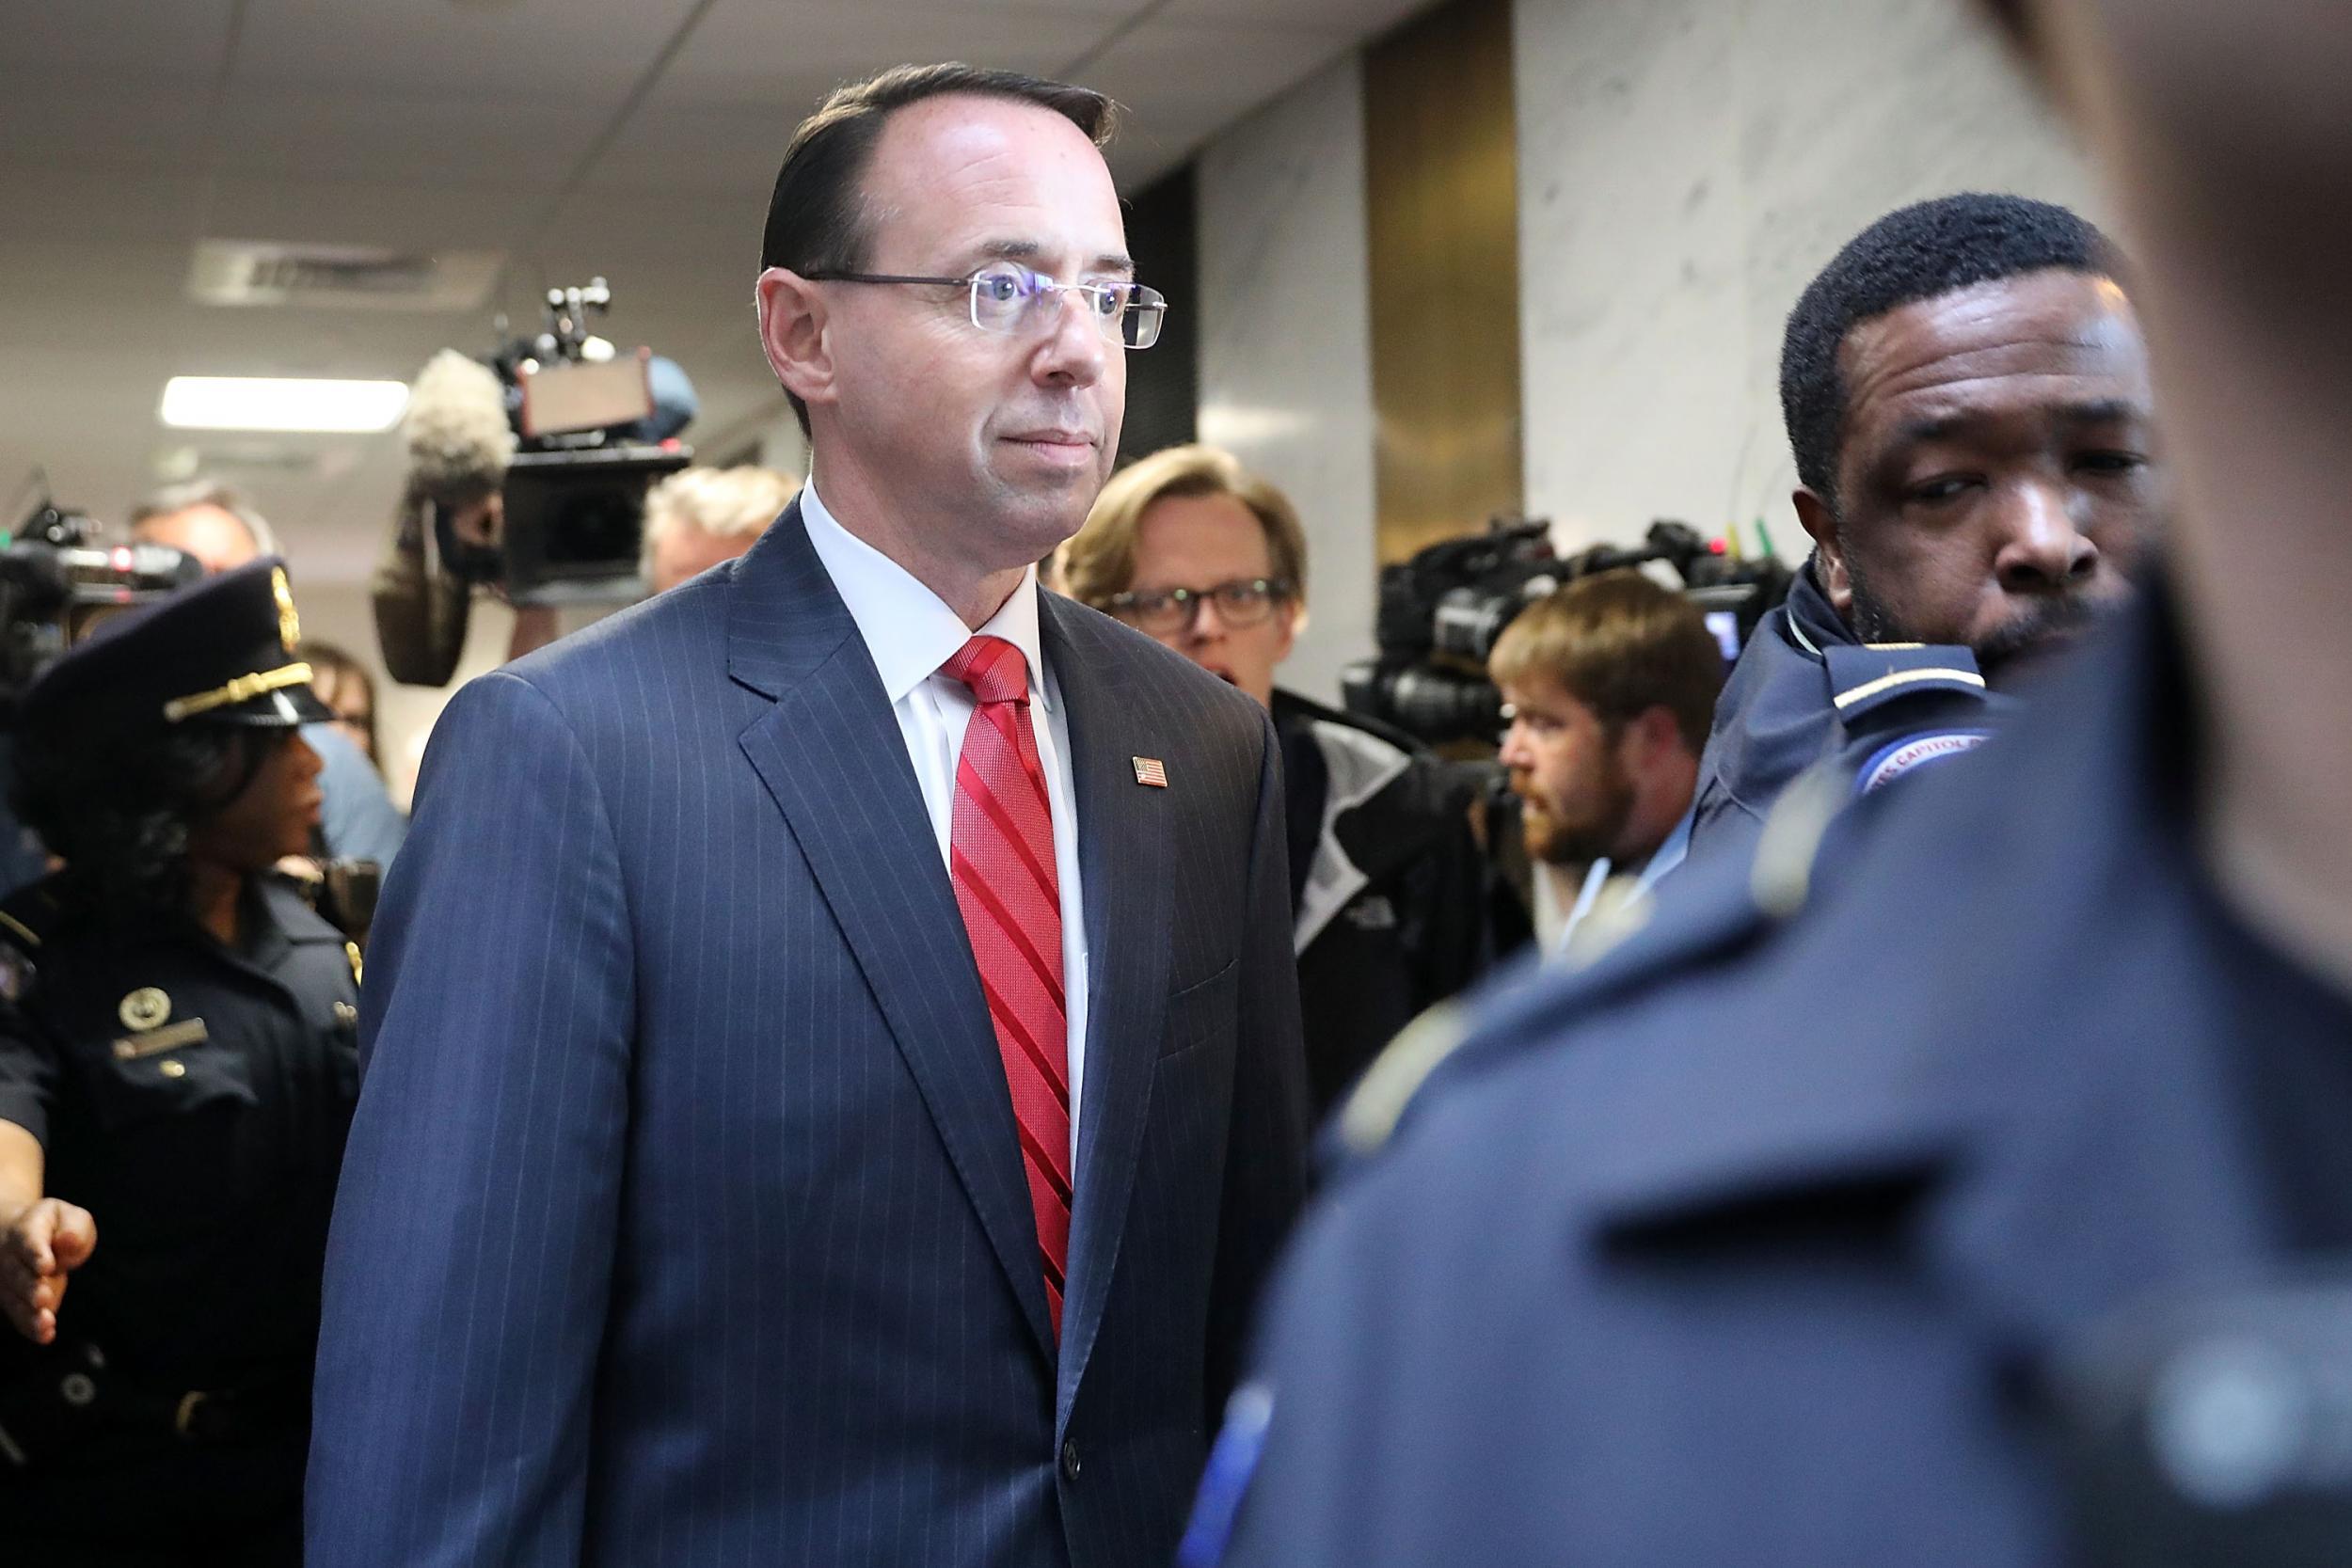 Rosenstein says that he had talked to Sessions about shaking up the FBI months ago